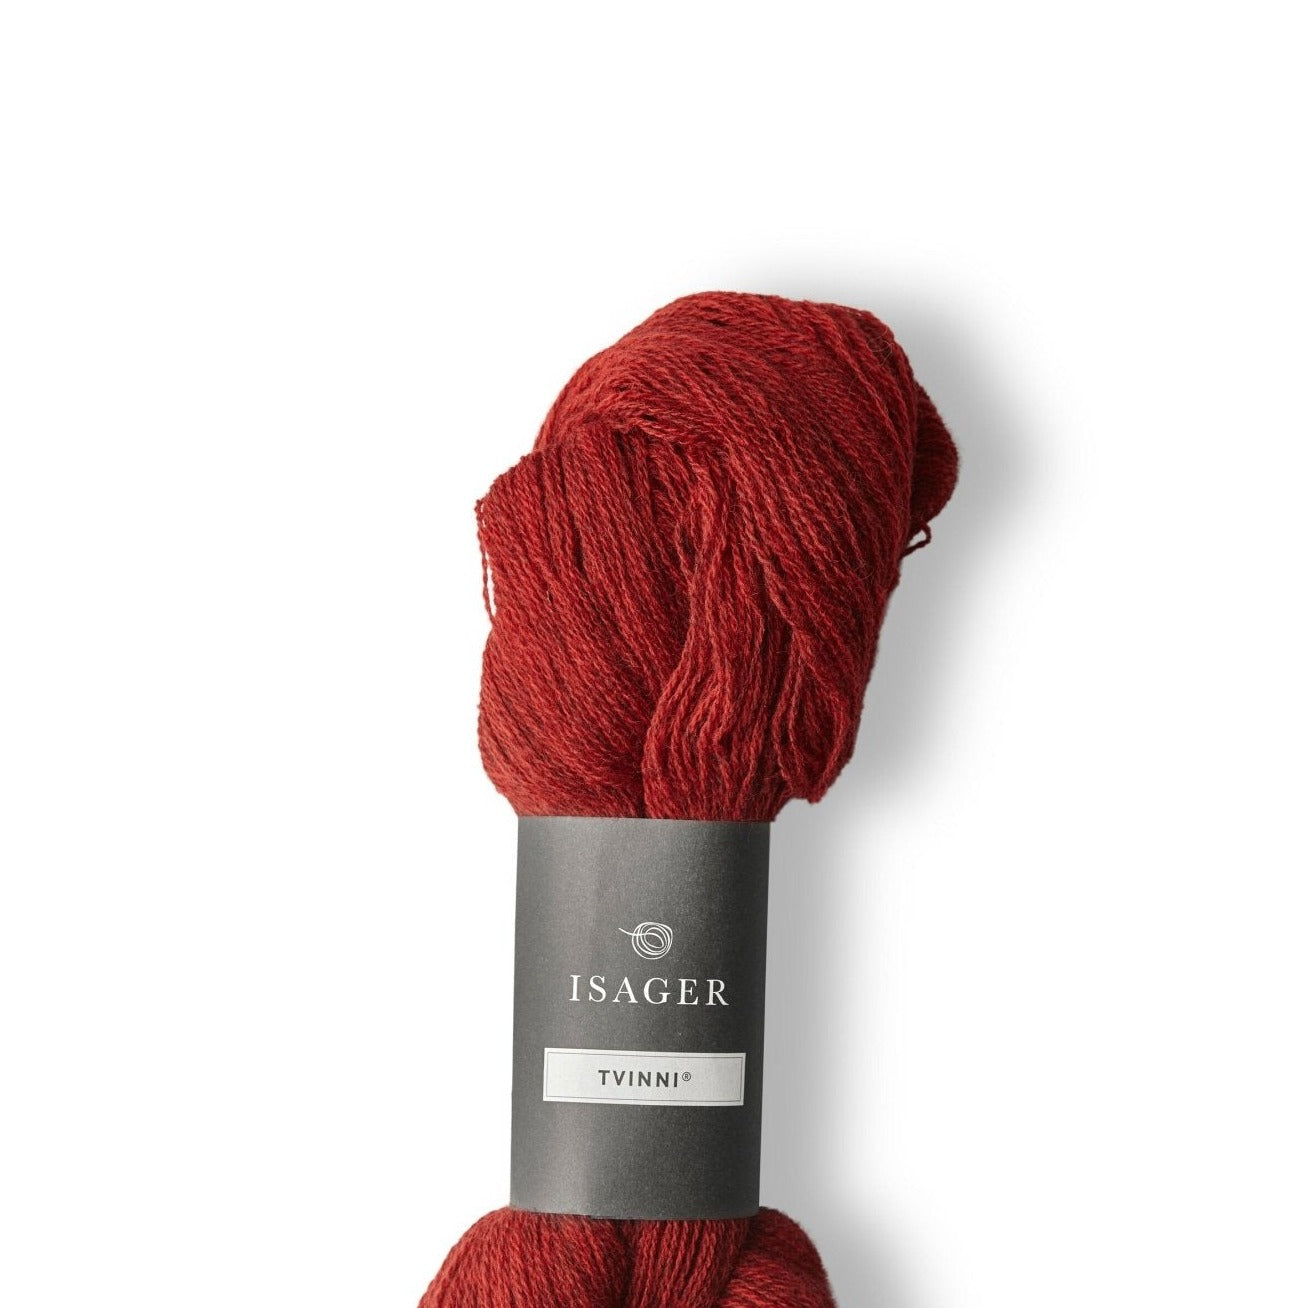 Isager Tvinni - 32s - 4 Ply - Isager - The Little Yarn Store